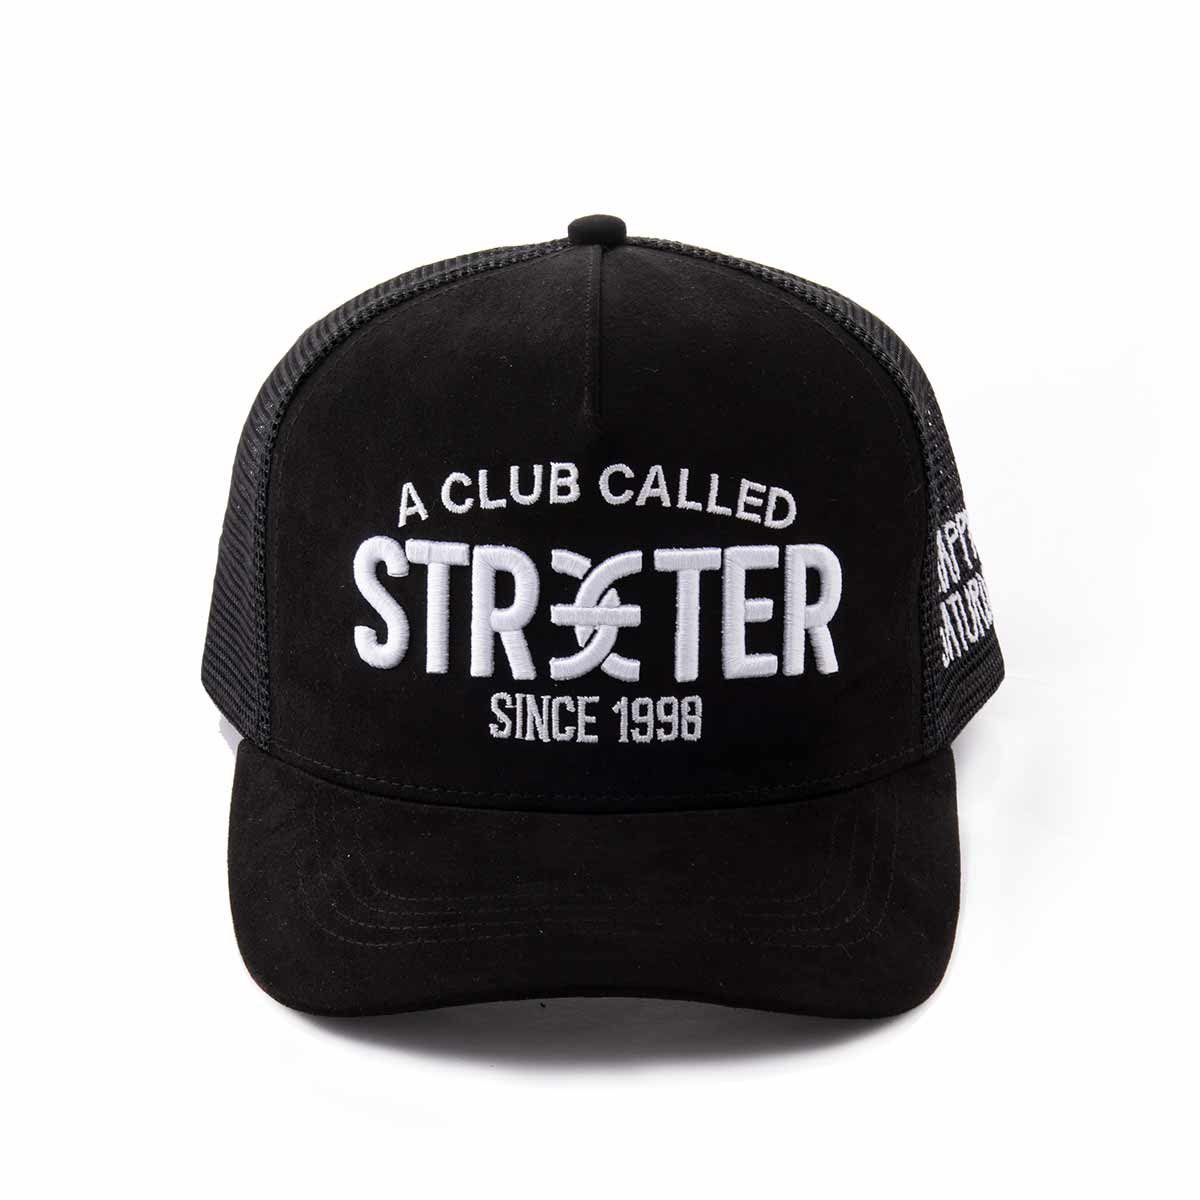 Streeter-casual-black-fashion-trucker-hat-for-women-and-men-KN2103081